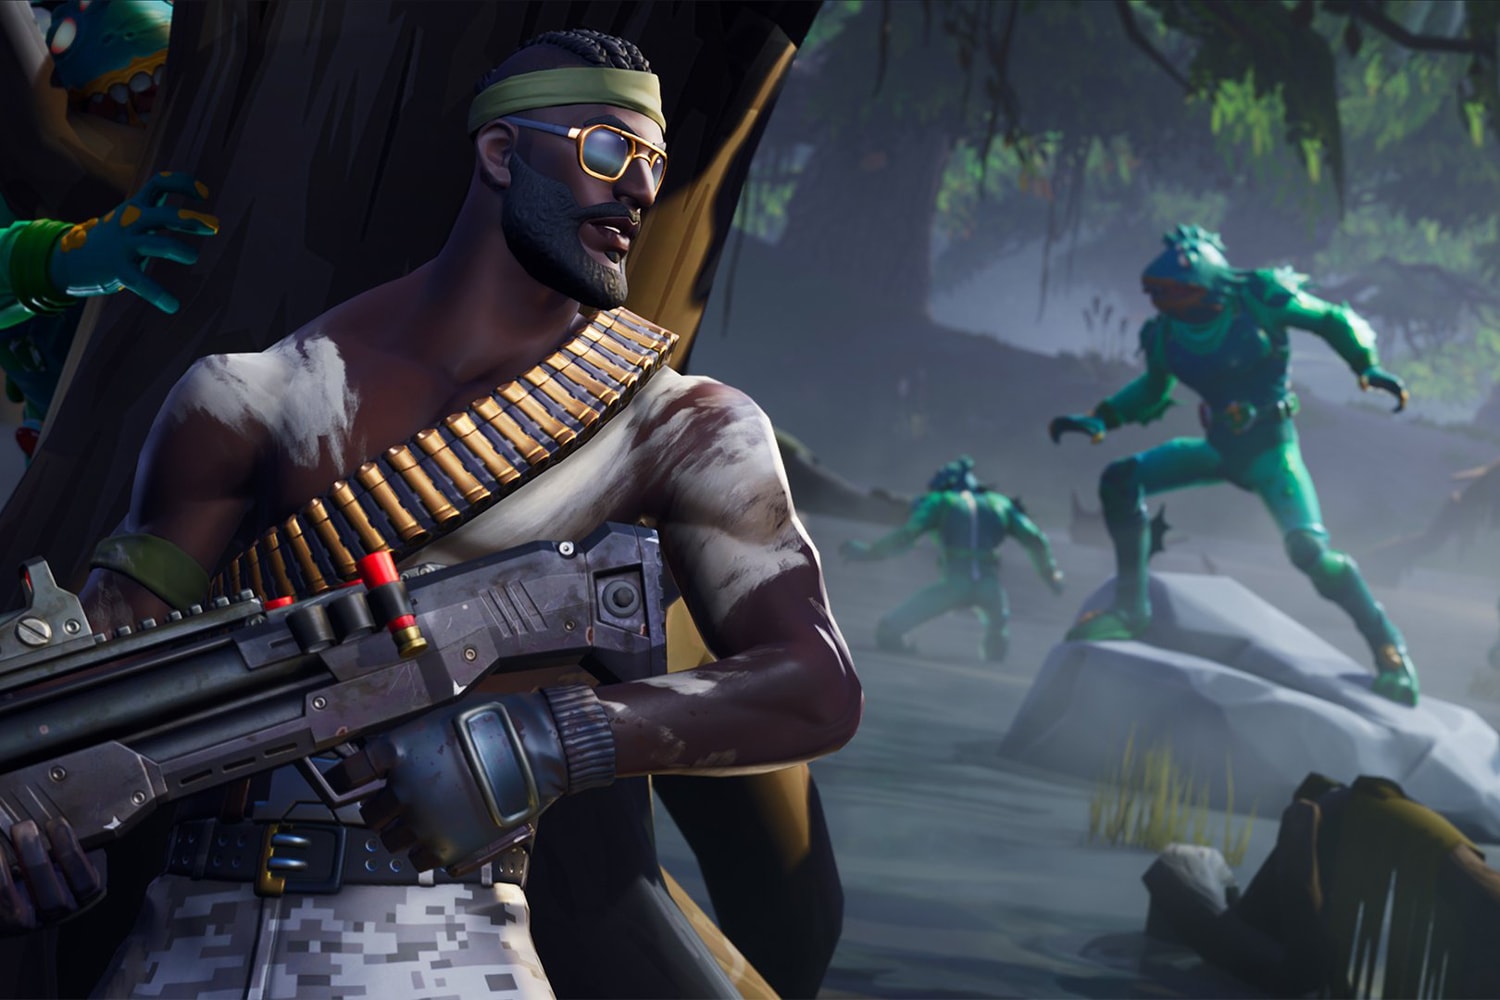 Fake Fortnite Android apps trick users into giving away details